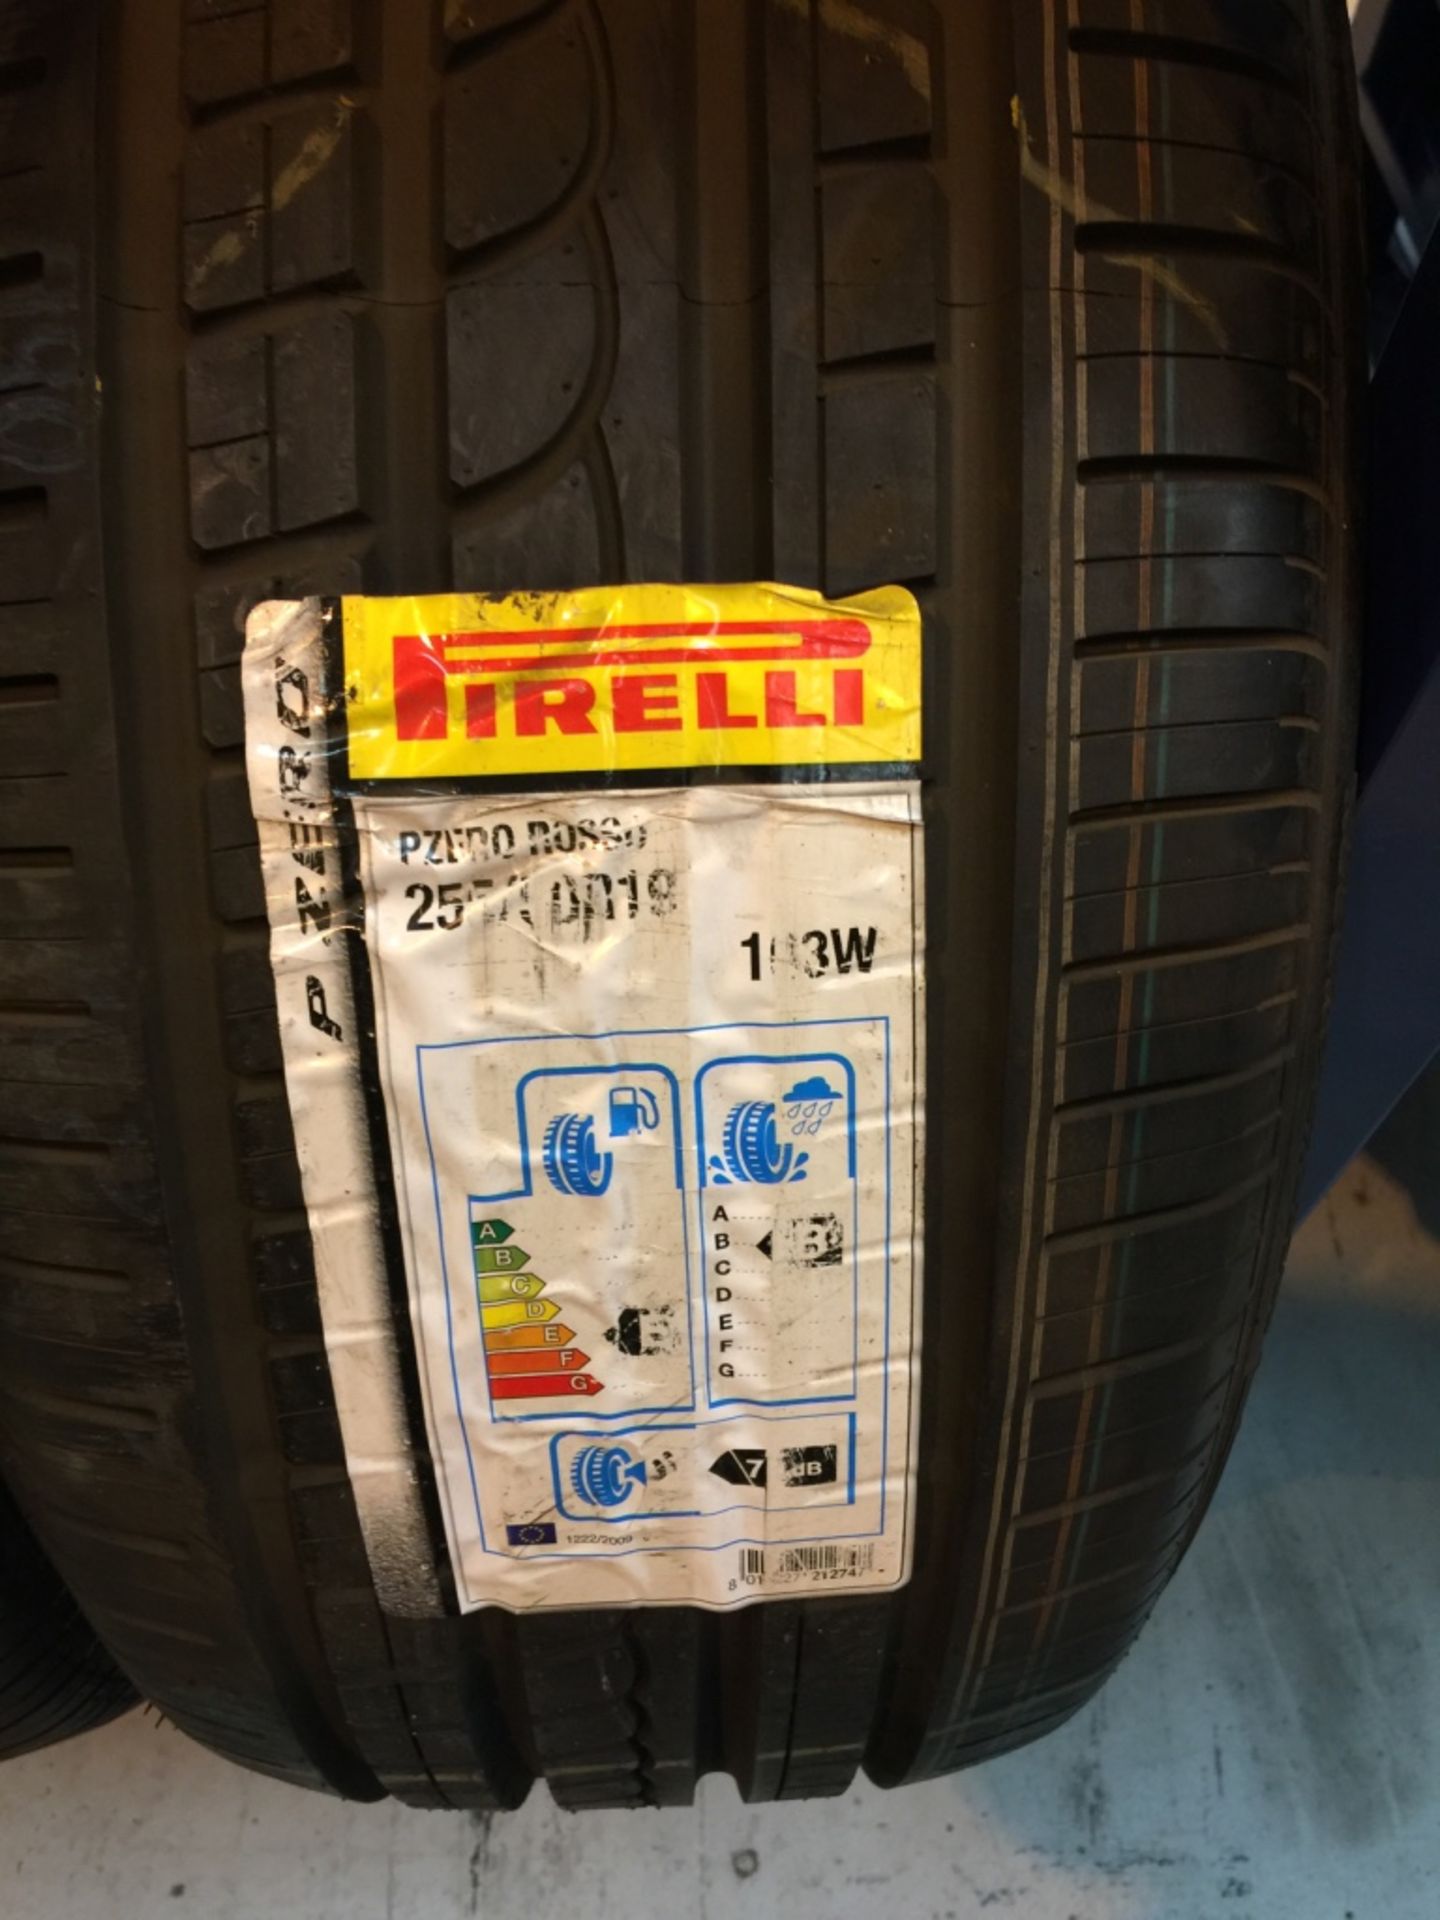 54: Pirelli Tyres Car & 4X4 - Many Large Sizes to include 18,19,21" Please see further Pictures ( - Image 43 of 55